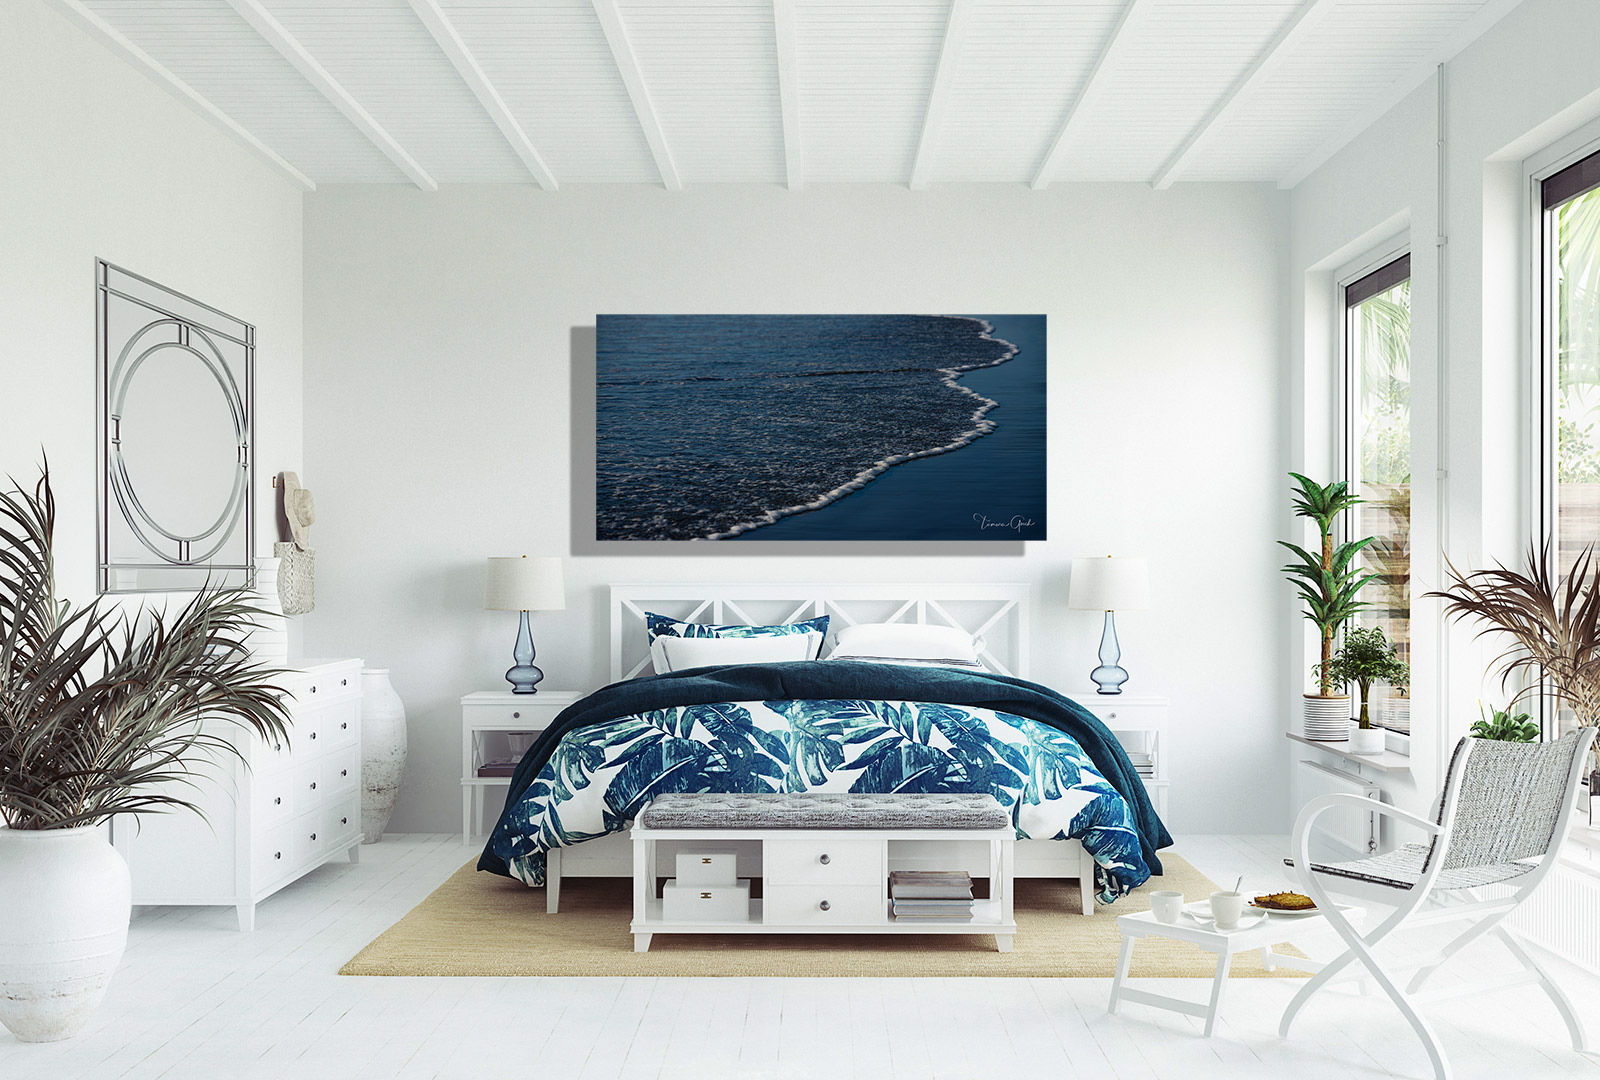 A fine art photograph of the sea rolling in hanging in a bedroom